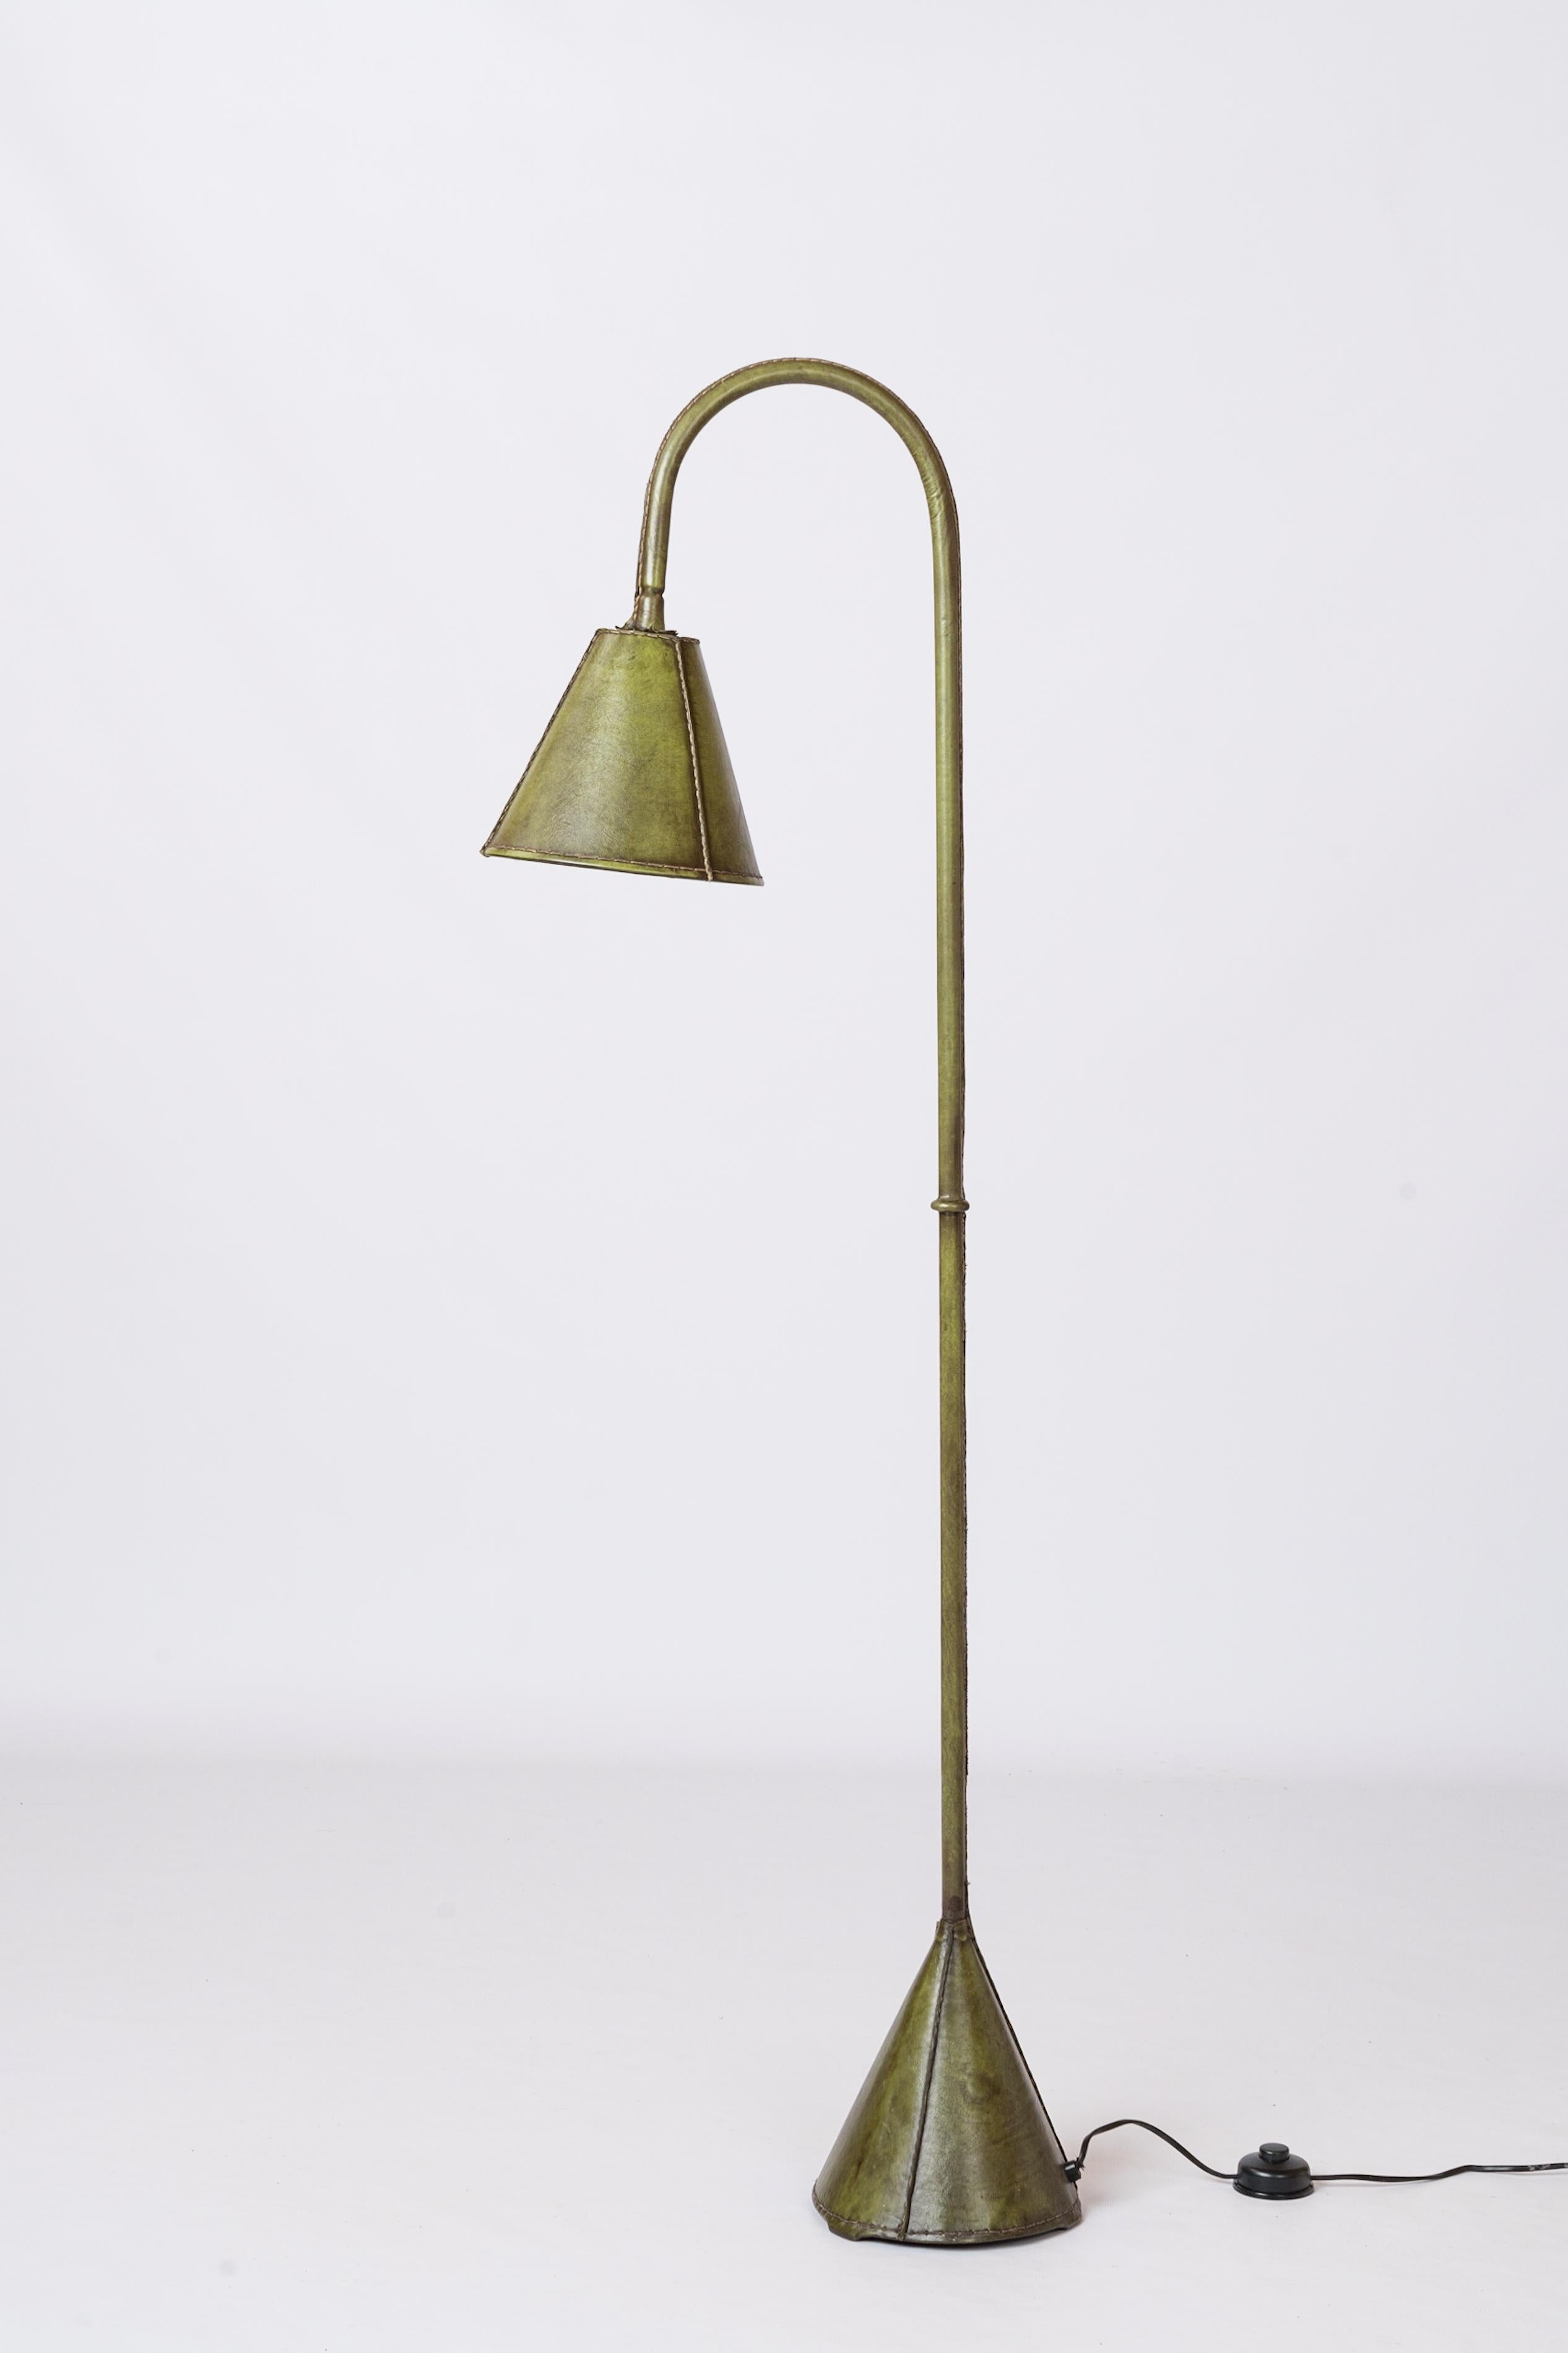 Iconic all olive green leather dual cones floor lamp by Valenti, Spain. Reminiscent of Jacques Adnet's designs.
European socket and wiring.
This lamp will ship from France and can be returned to either France or to a LIC NY location.
Price does not